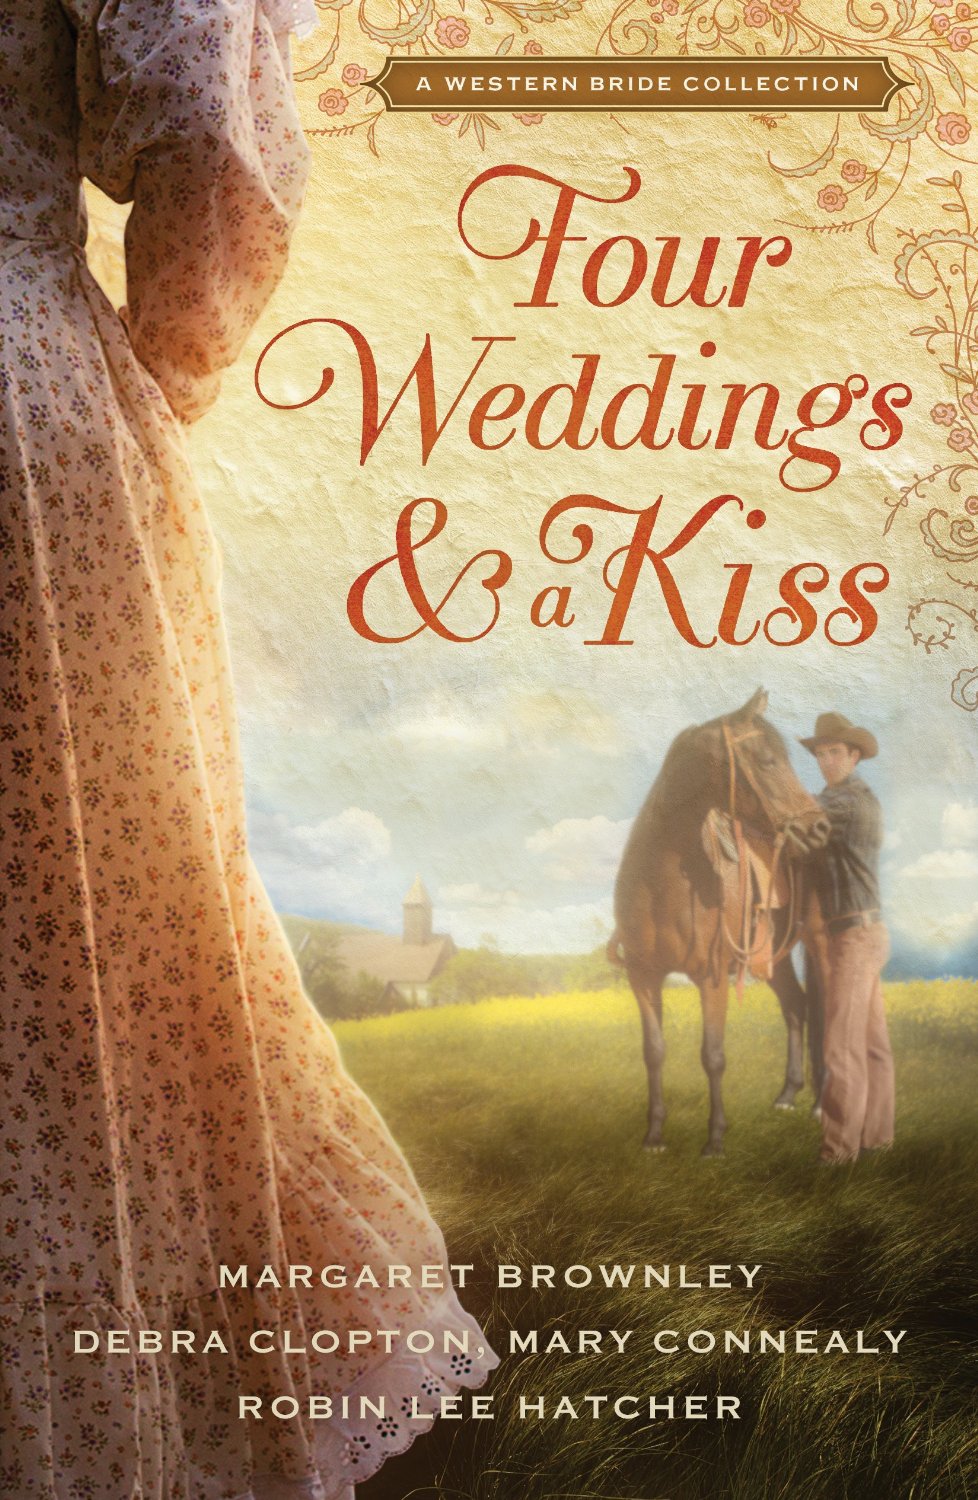 Book Review: Four Weddings and a Kiss—A Western Bride Collection